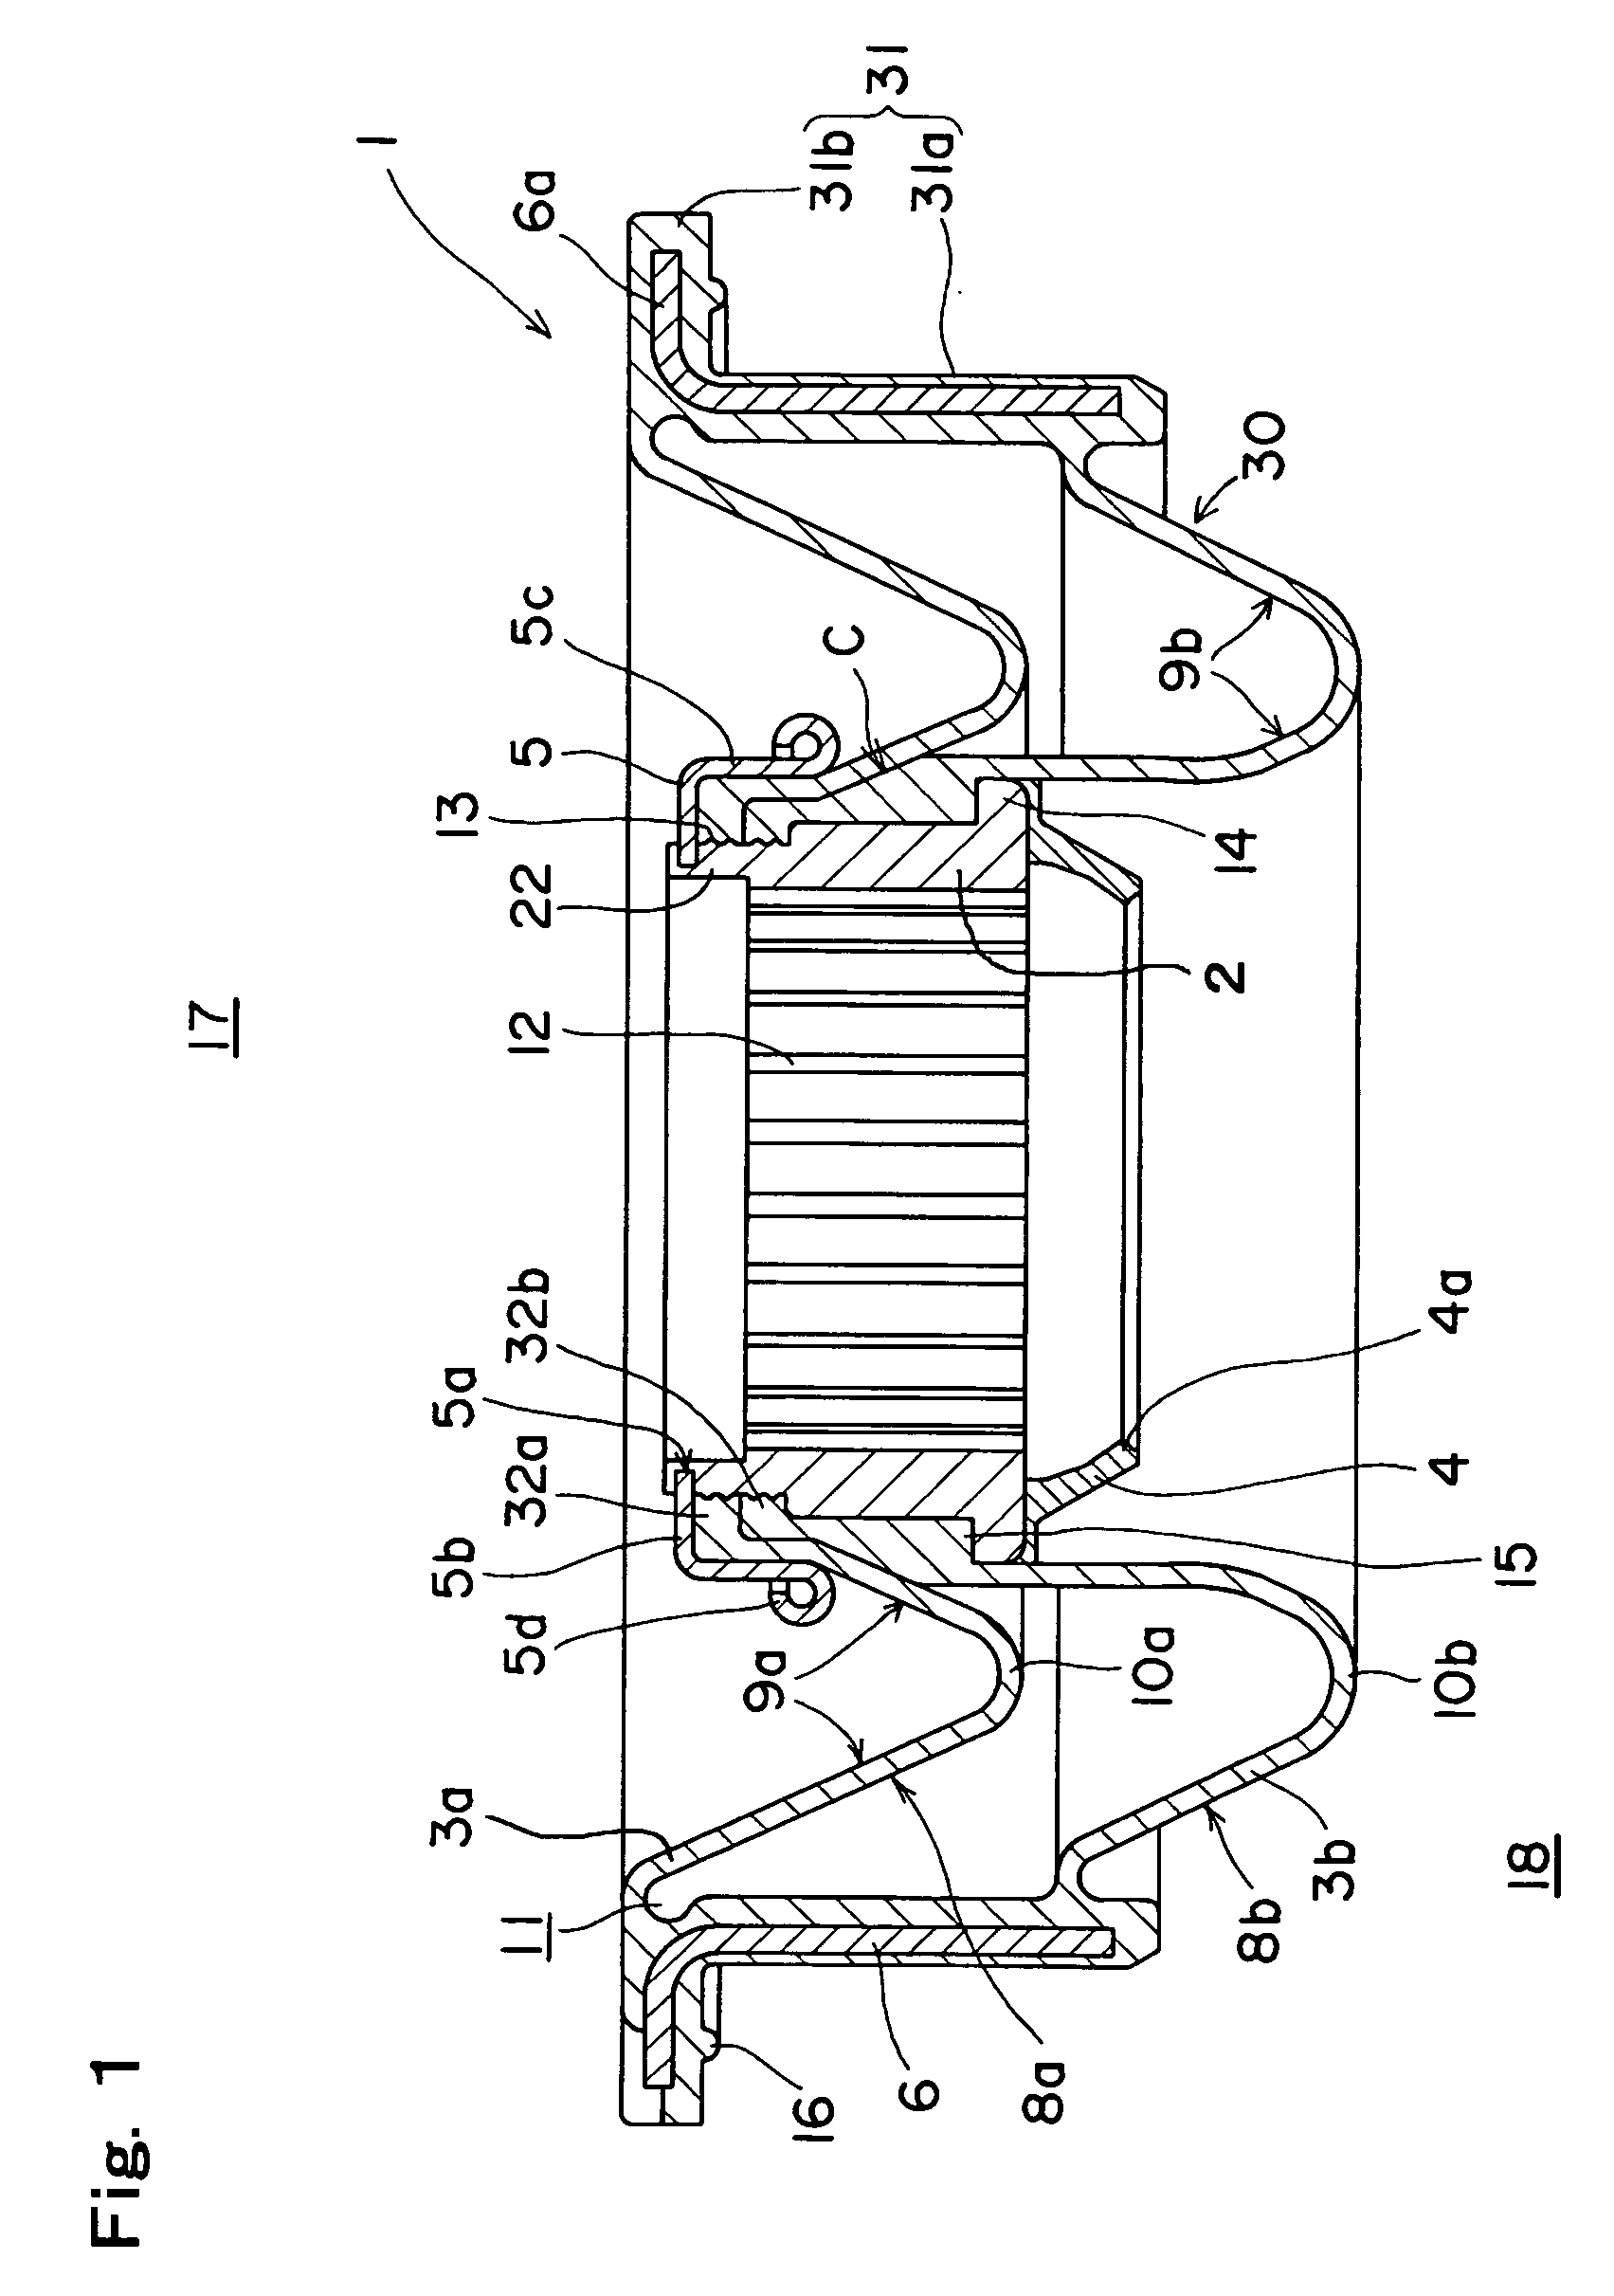 Dust Cover for a Steering Shaft